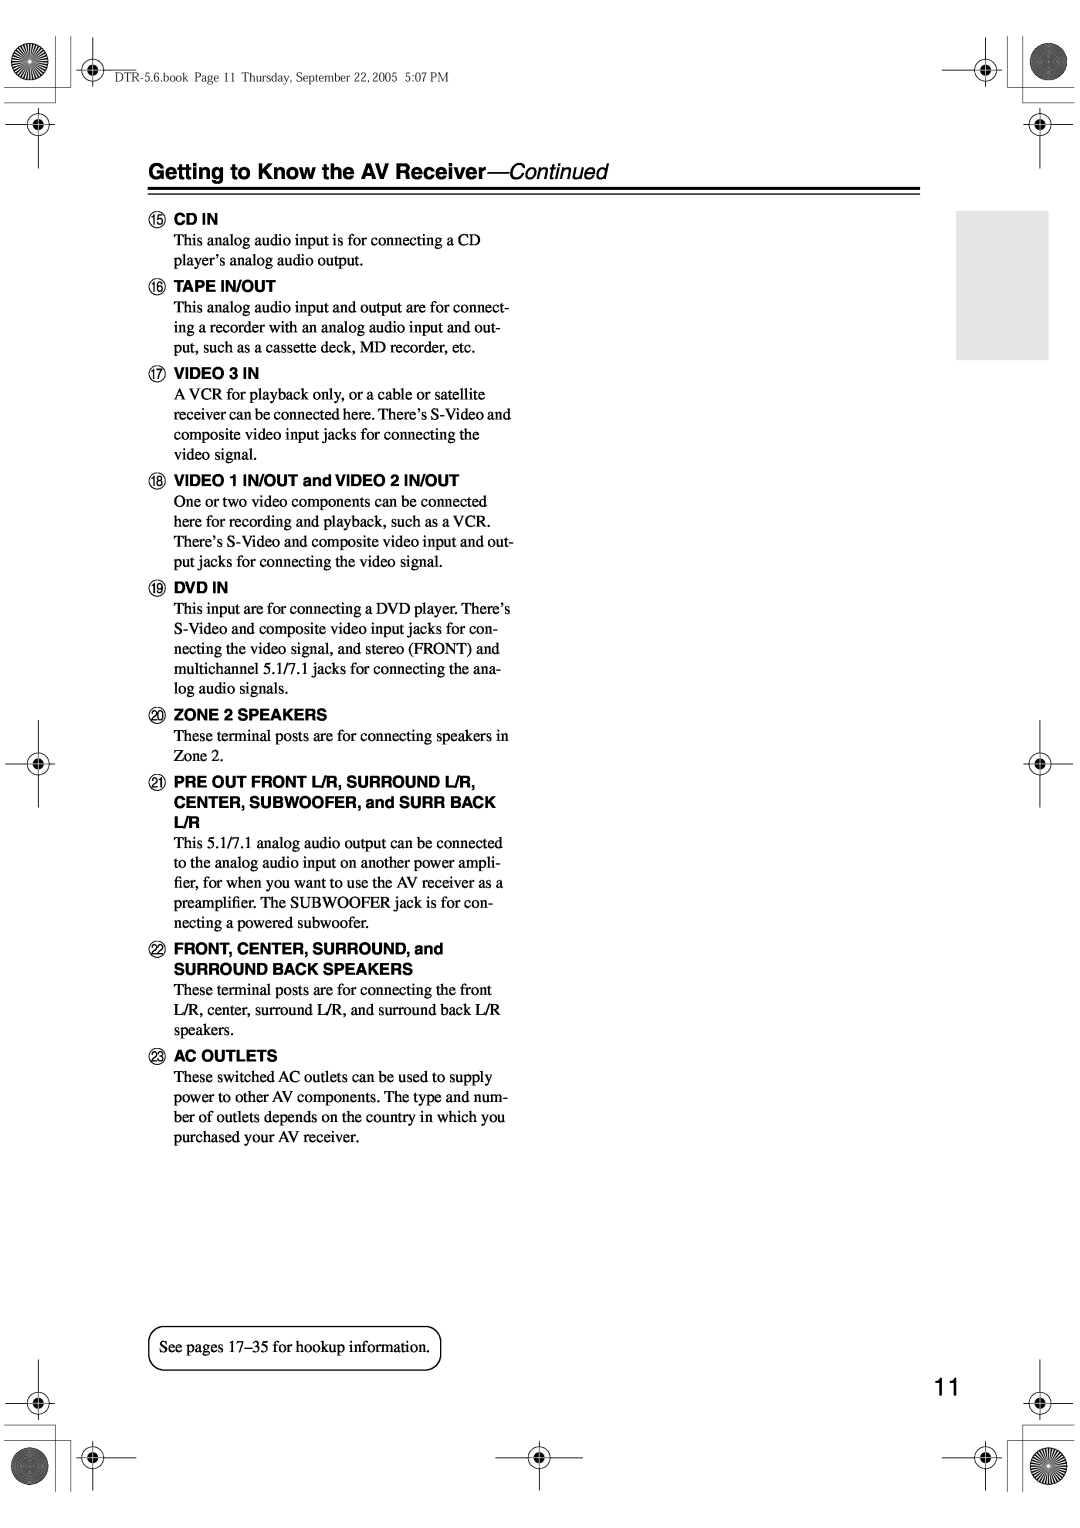 Integra DTR-5.6 instruction manual Getting to Know the AV Receiver—Continued, Ocd In 